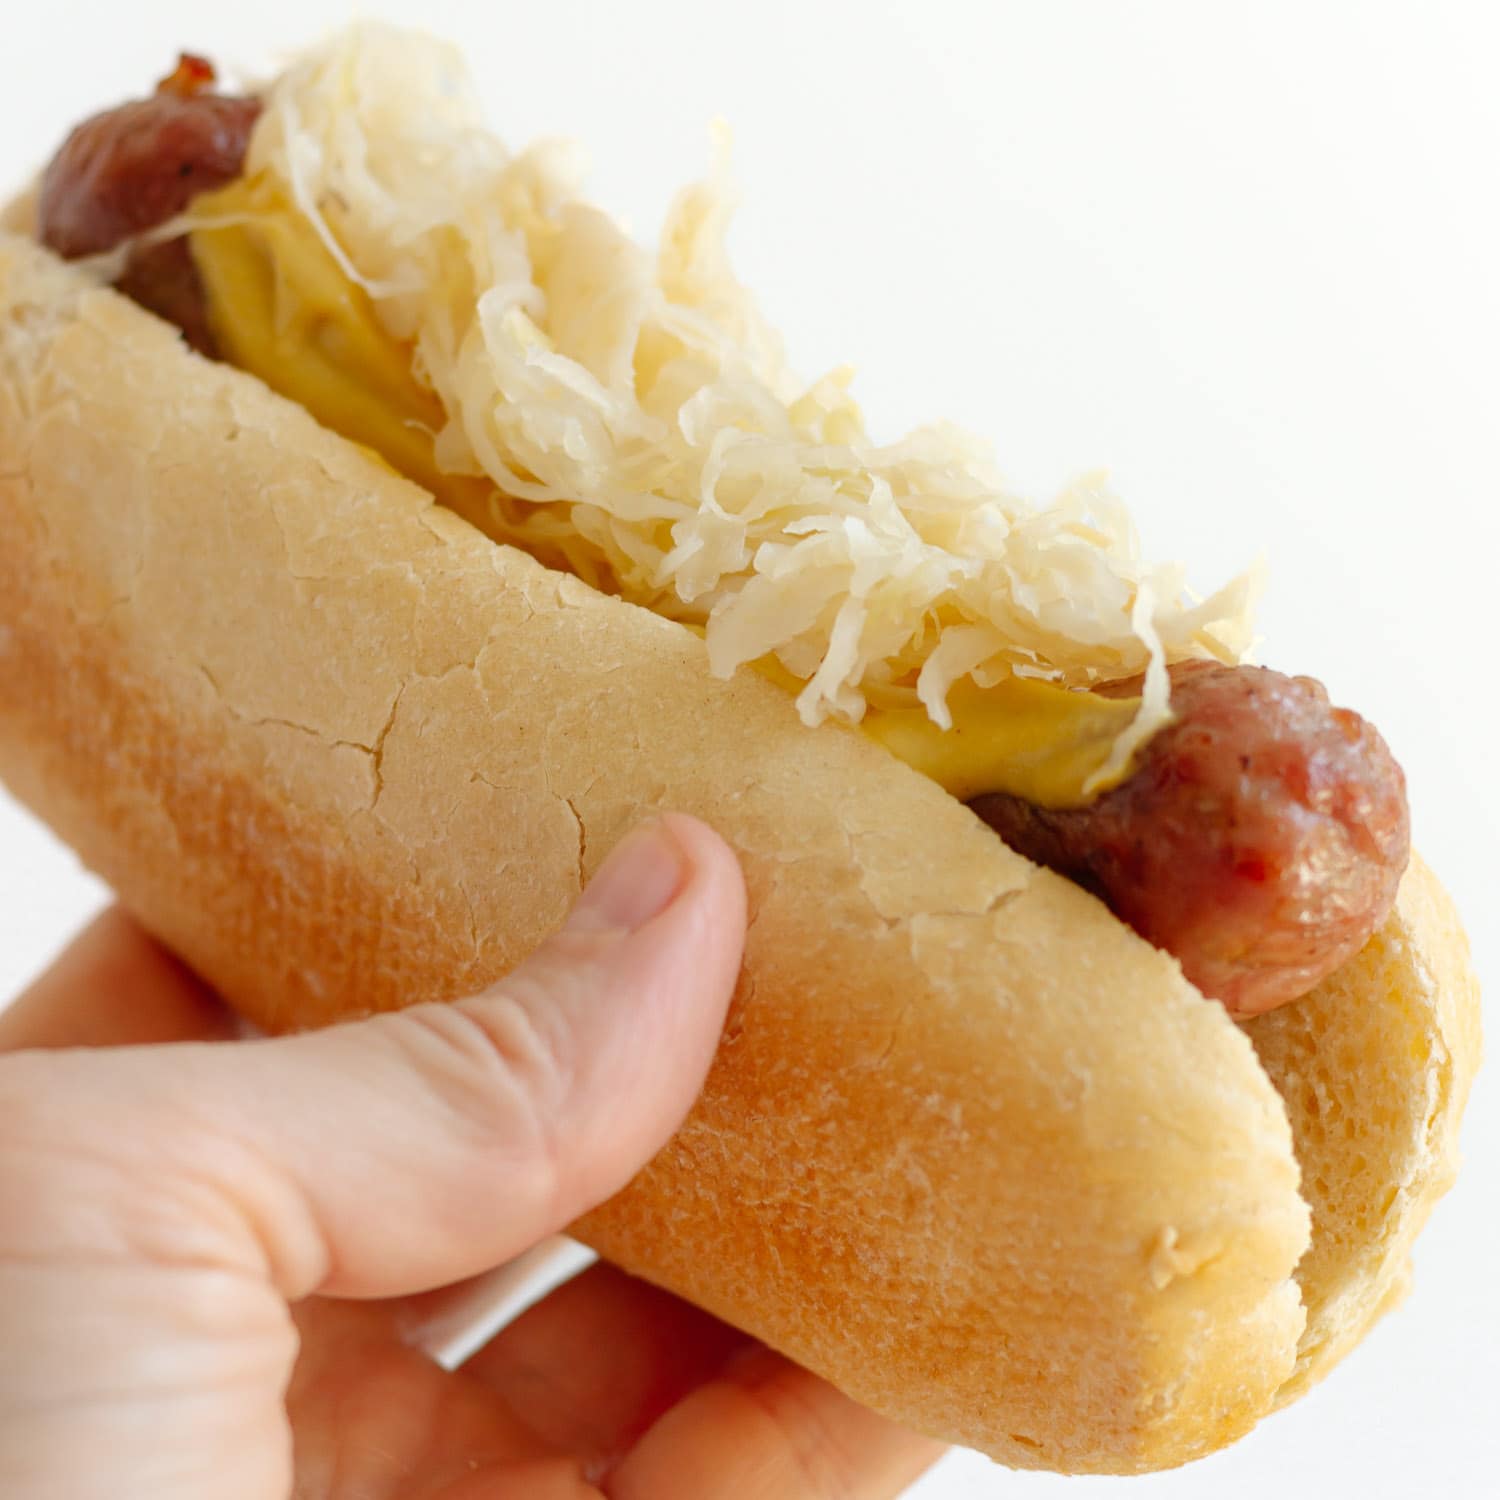 Hand holding bratwurst on a bun topped with mustard and sauerkraut.